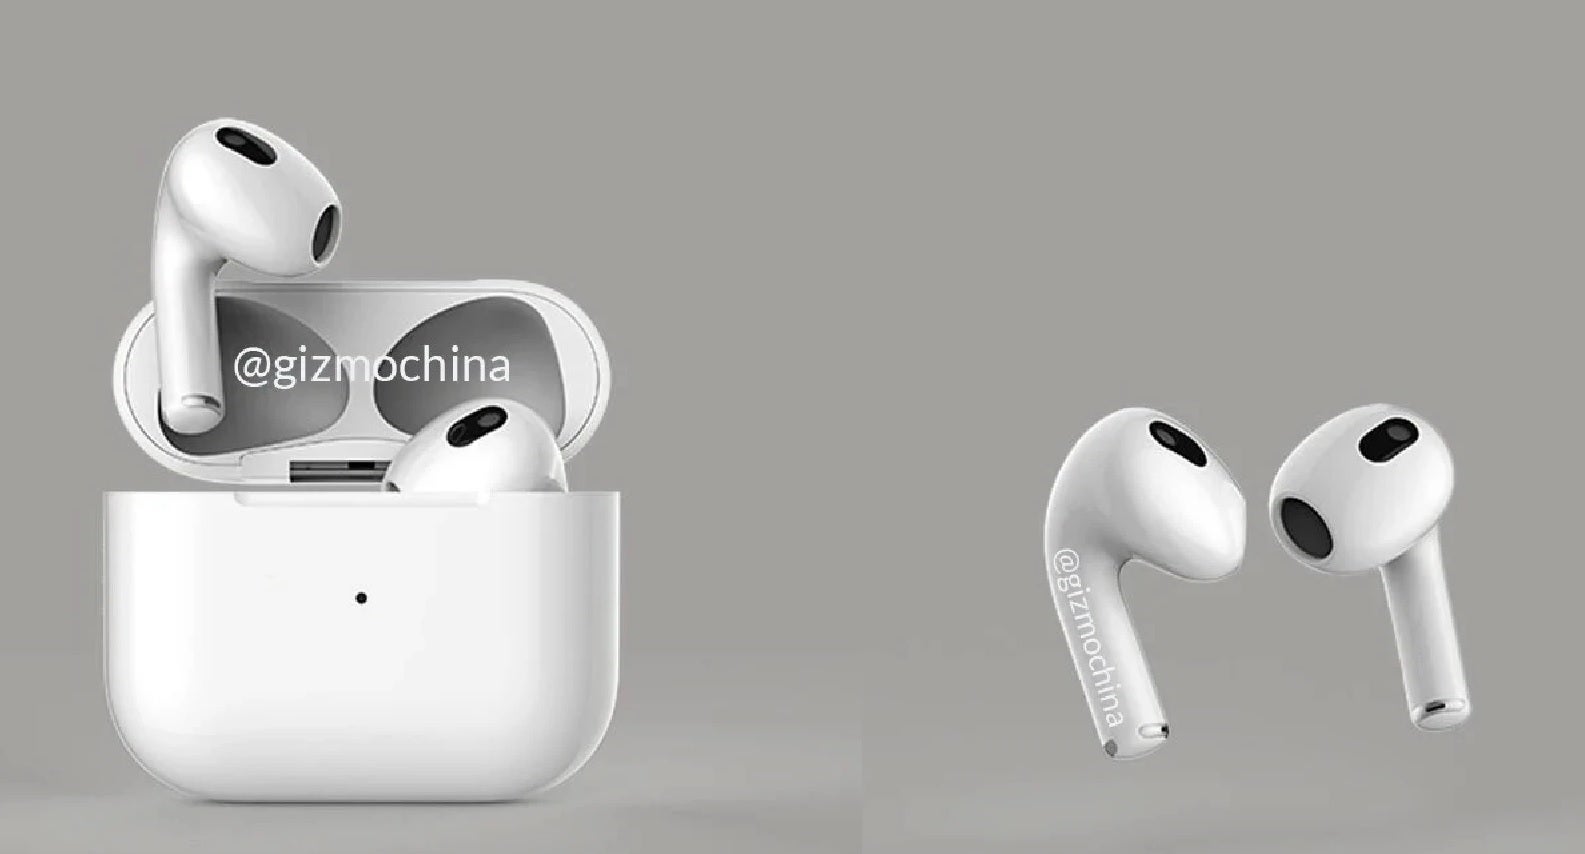 AirPods 3 to be unveiled on May 18th? - Latest rumor calls for Apple AirPods 3 to be released on May 18th